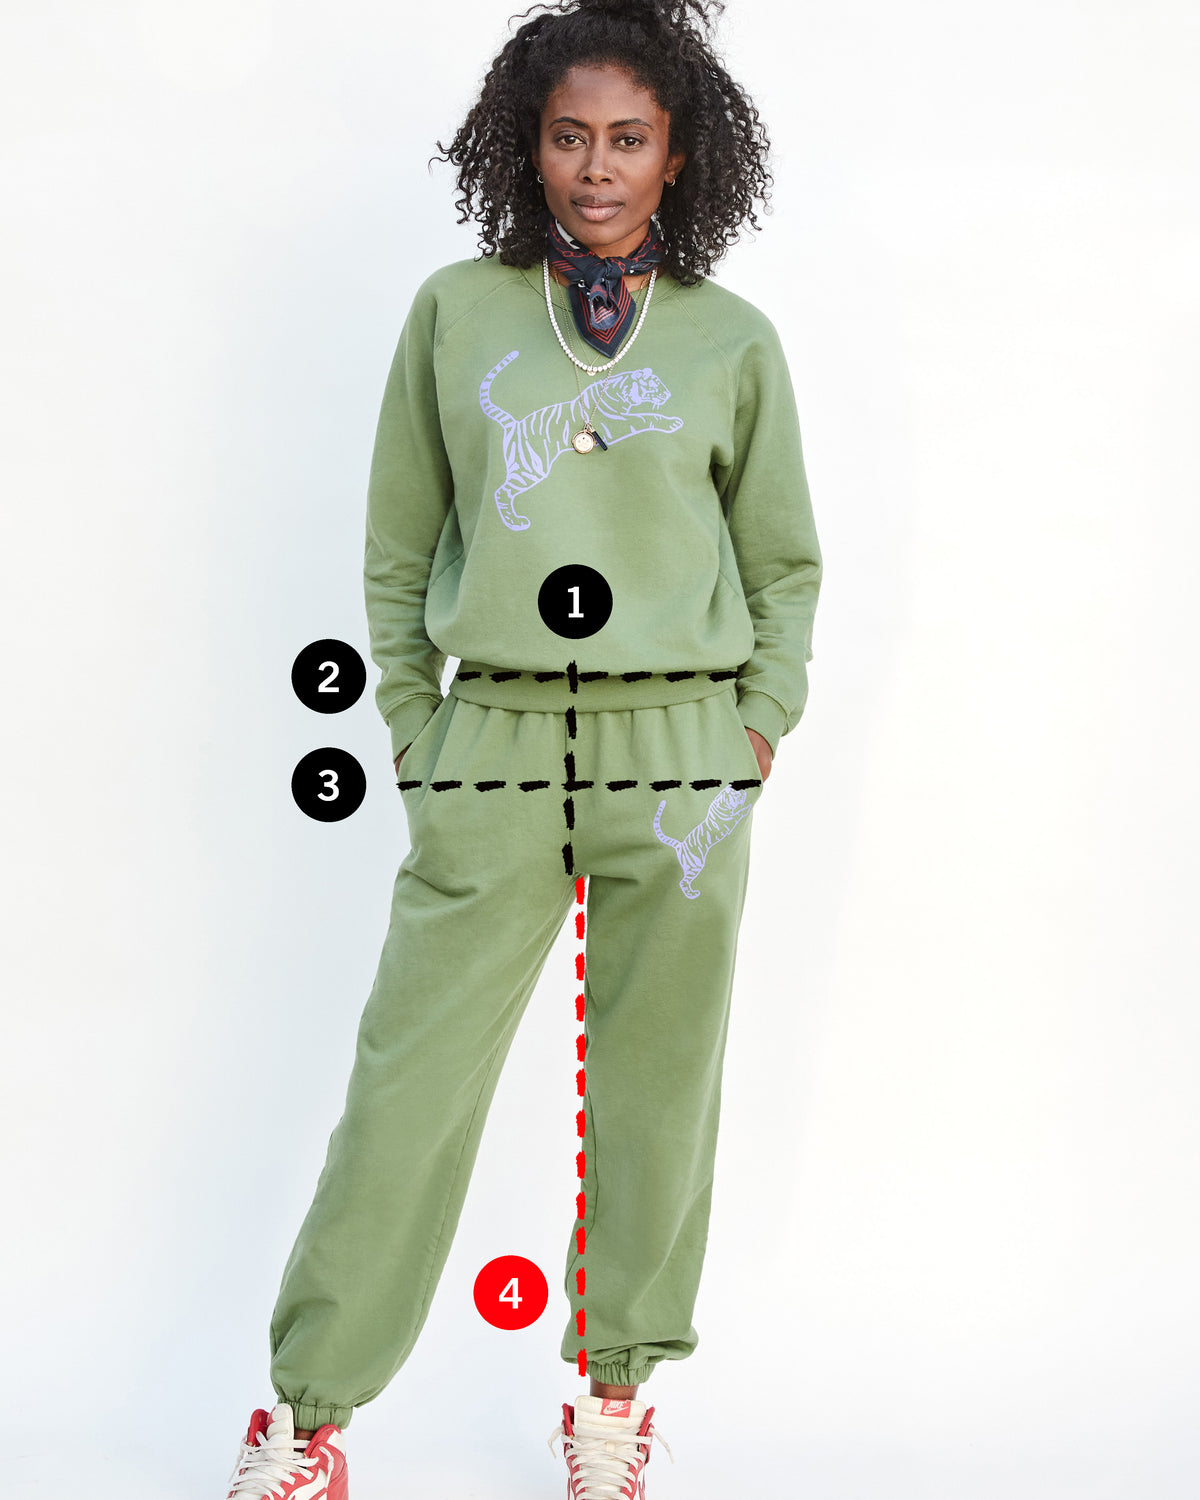 image of Mecca in a green sweatsuit  in a grey with 4 lines depicting where the user should measure for their rise, waist, hip and inseam measurements in comparison to the garment